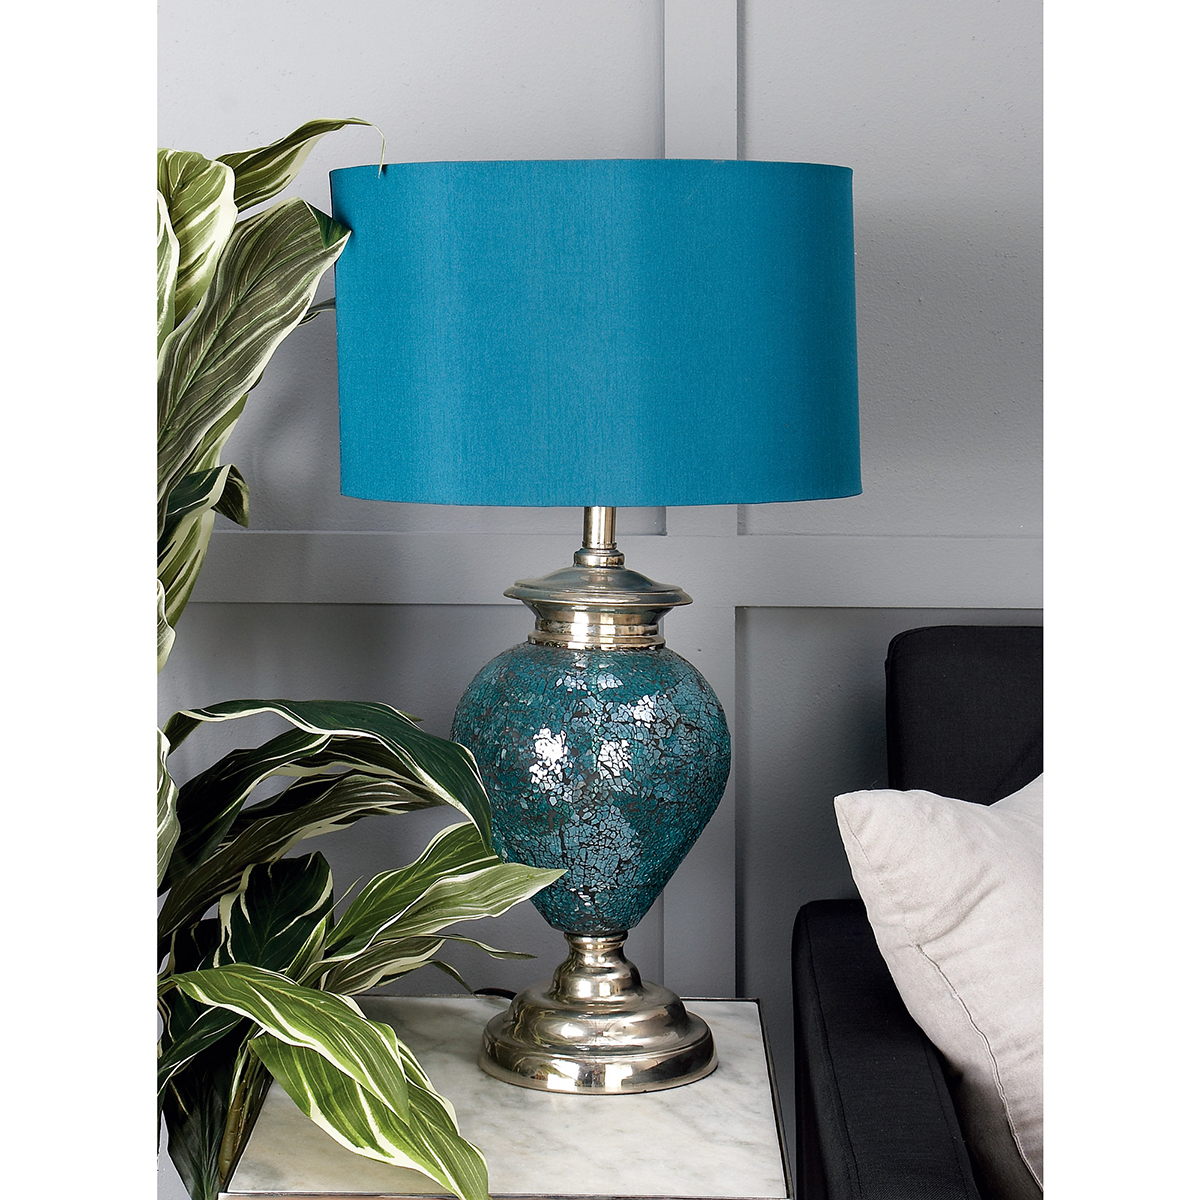 9th & Pike(R) Silver Glass Tuscan Table Lamp